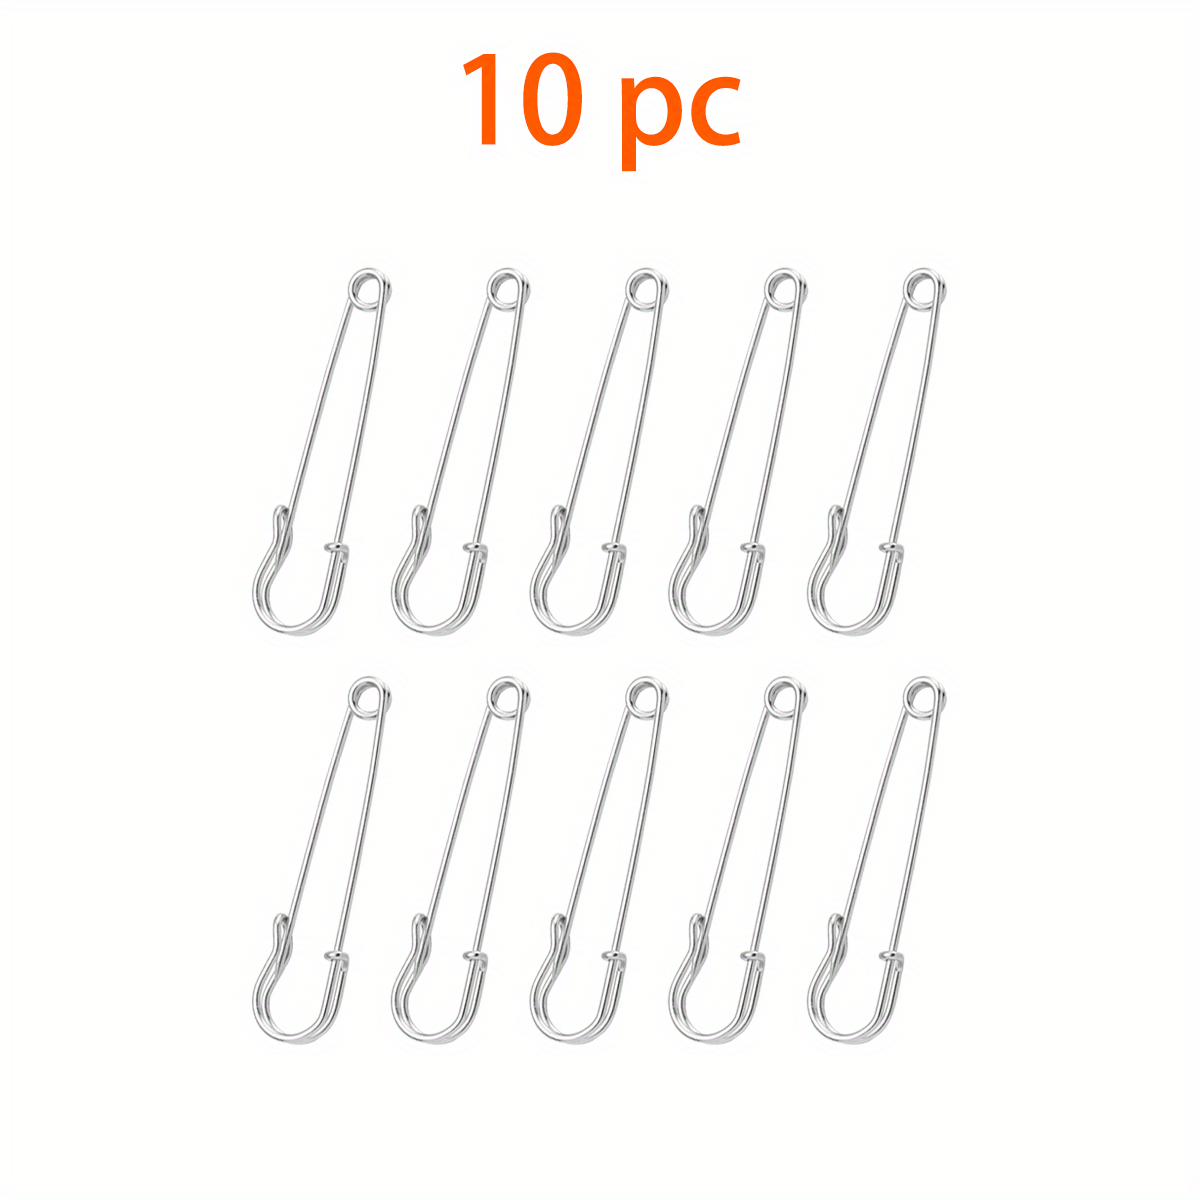 Safety Pins Large Heavy Duty Safety Pin - LeBeila 12pcs Blanket